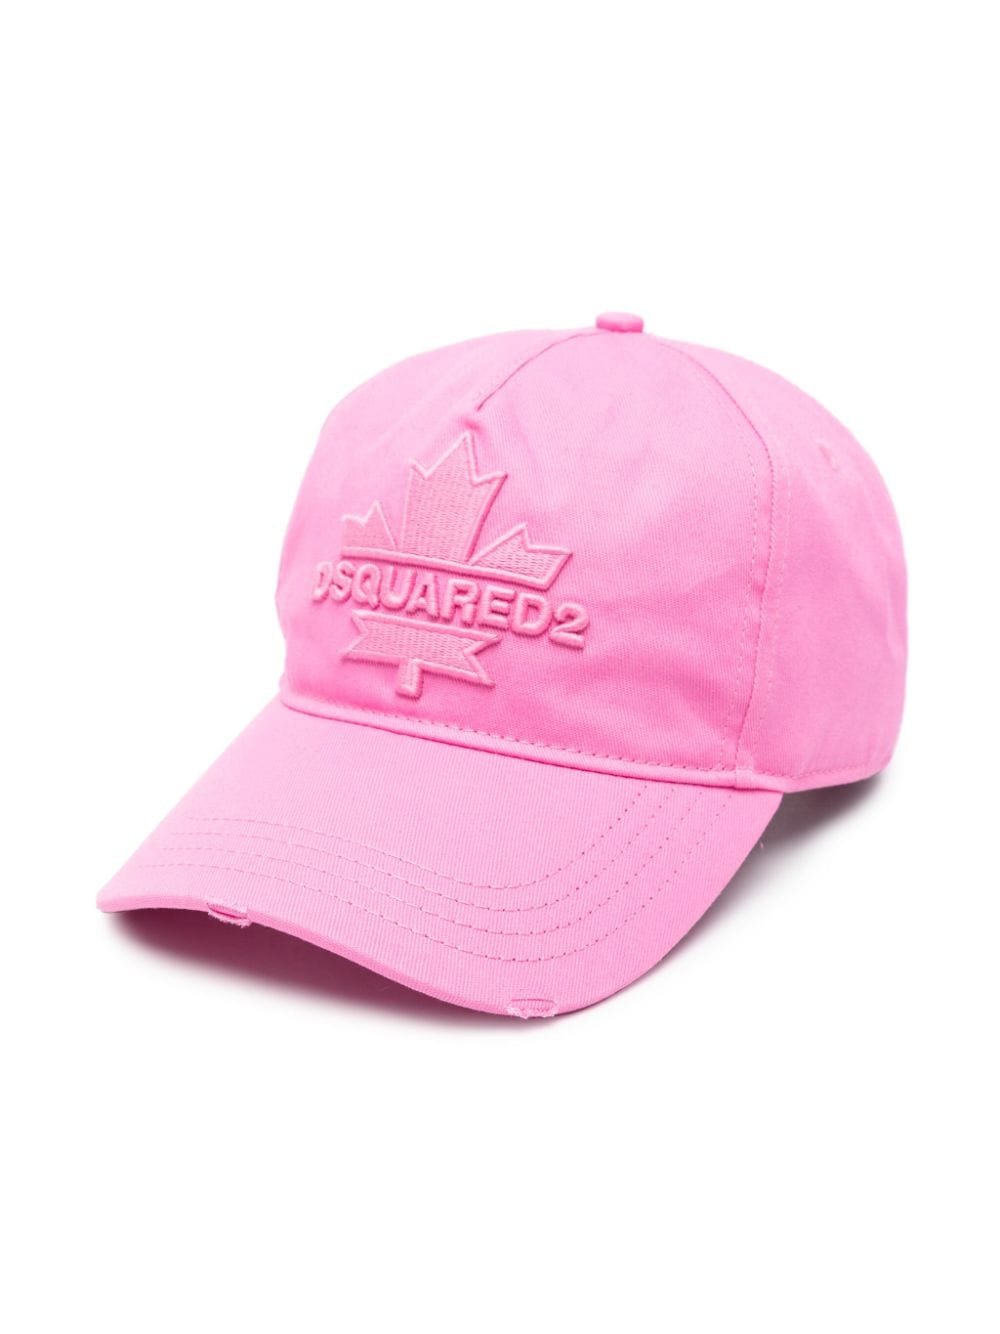 DSQUARED2 logo-embroidered cotton hat - Pink von DSQUARED2